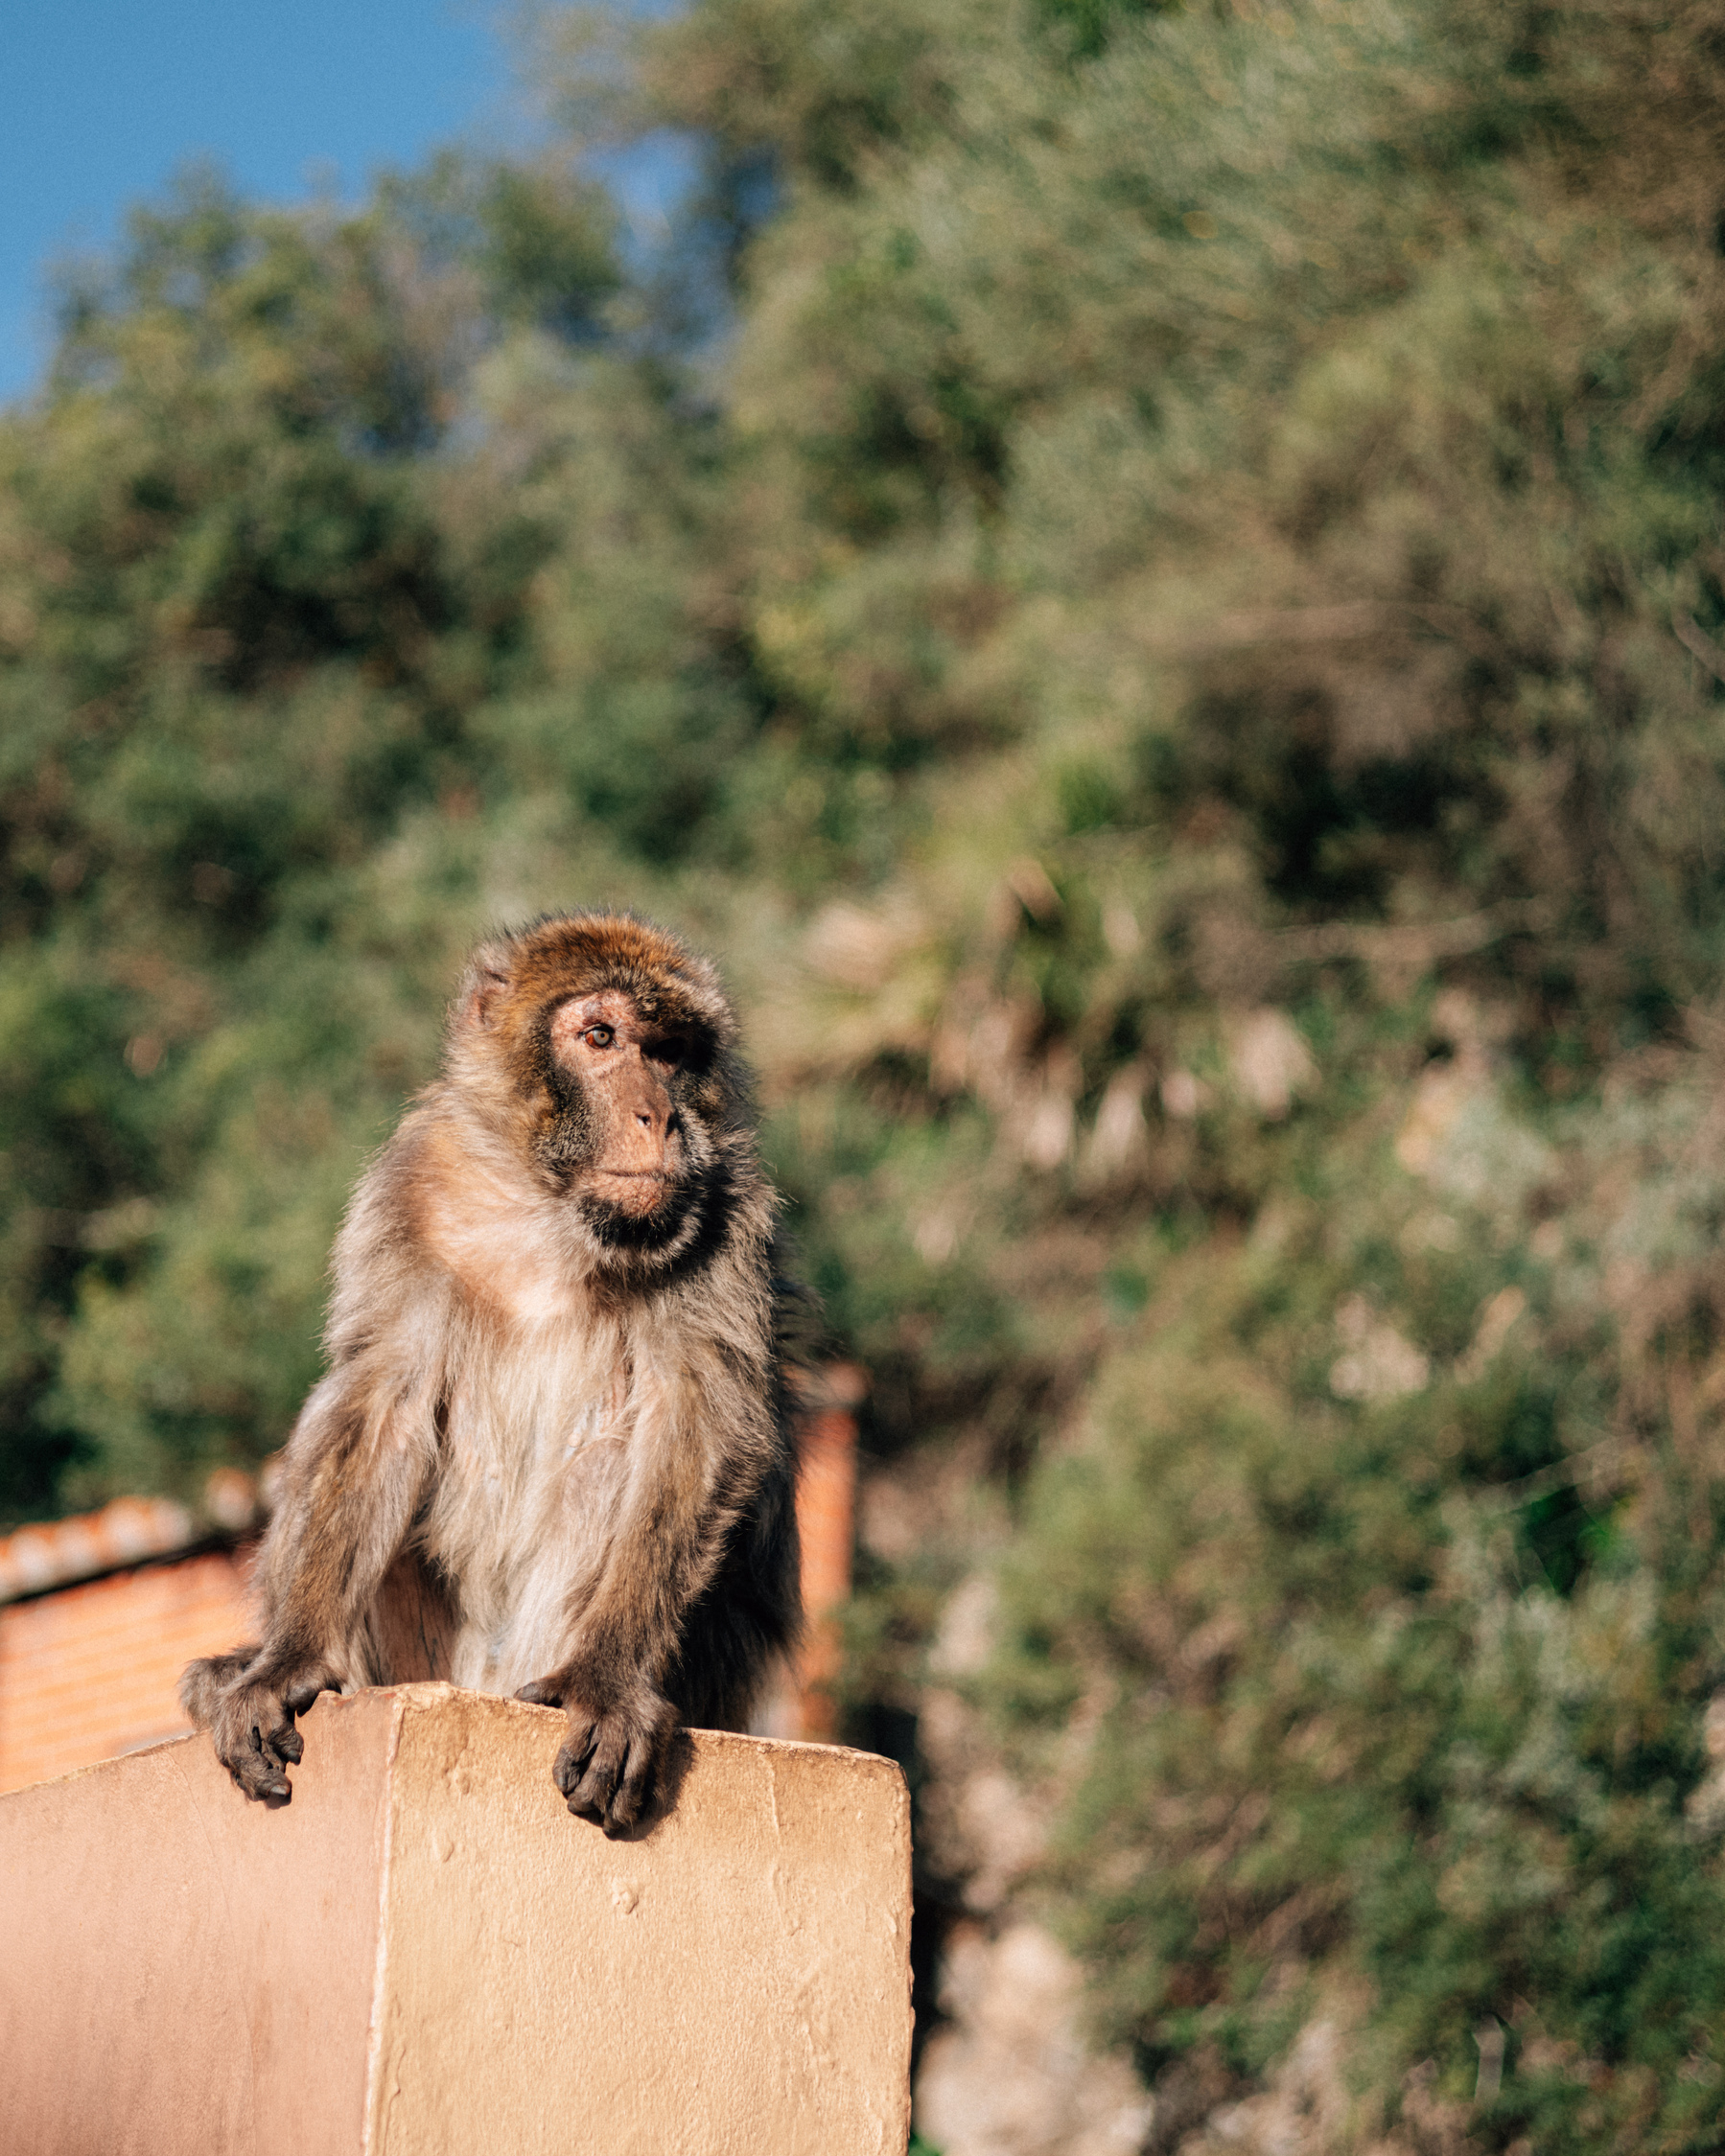 A Barbary Macaque on a wall looking slightly off camera, the background is mostly filled with trees.